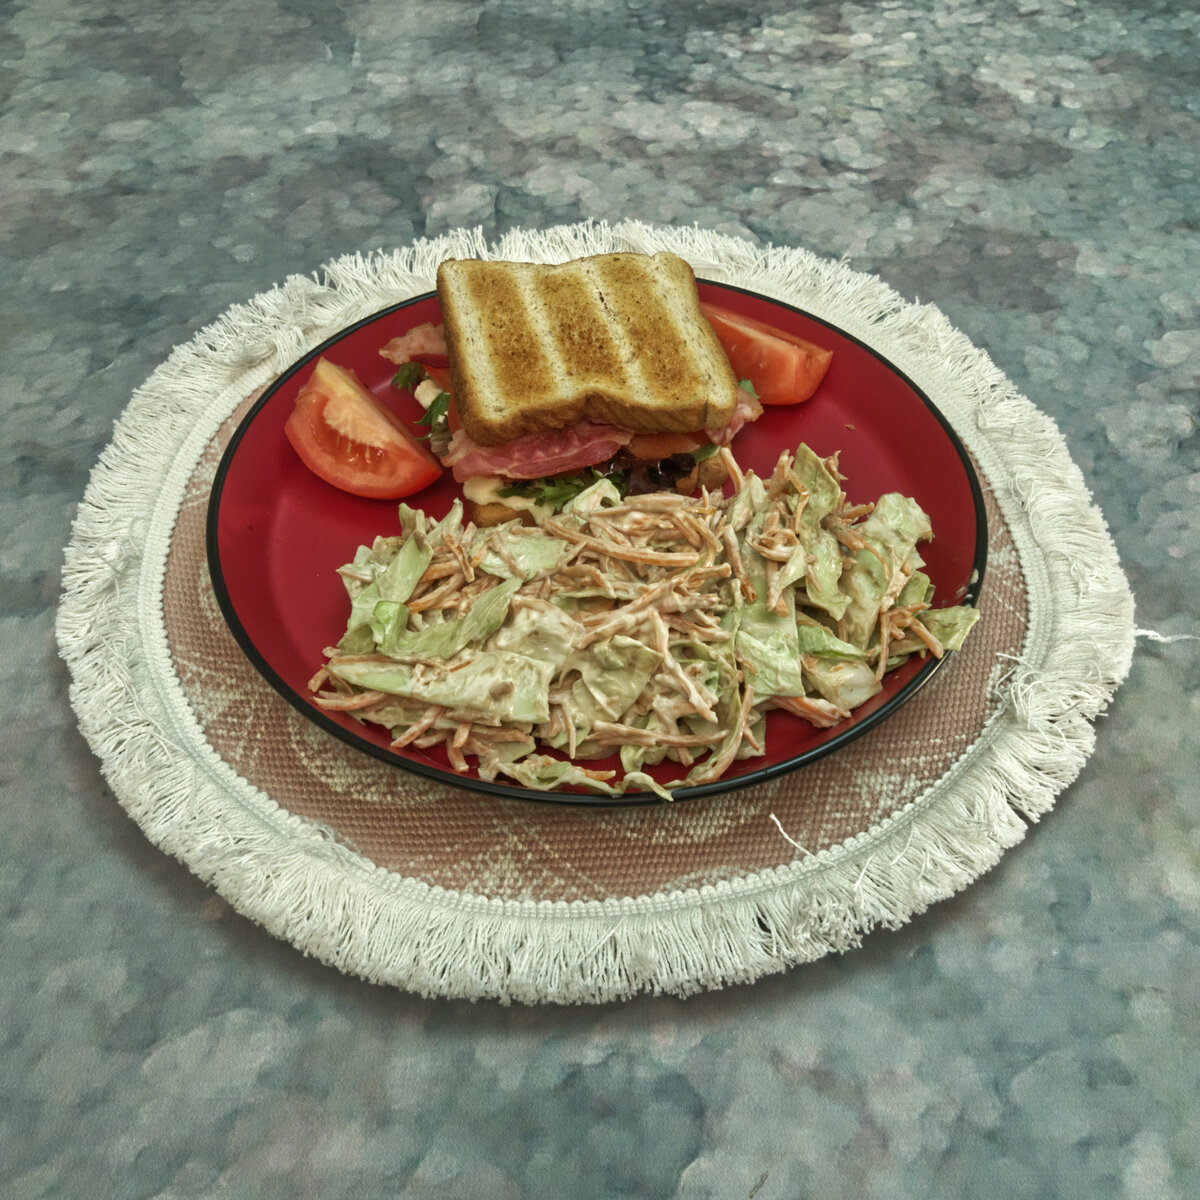 Bacon, Lettuce and Tomato Sandwich with Cole Slaw